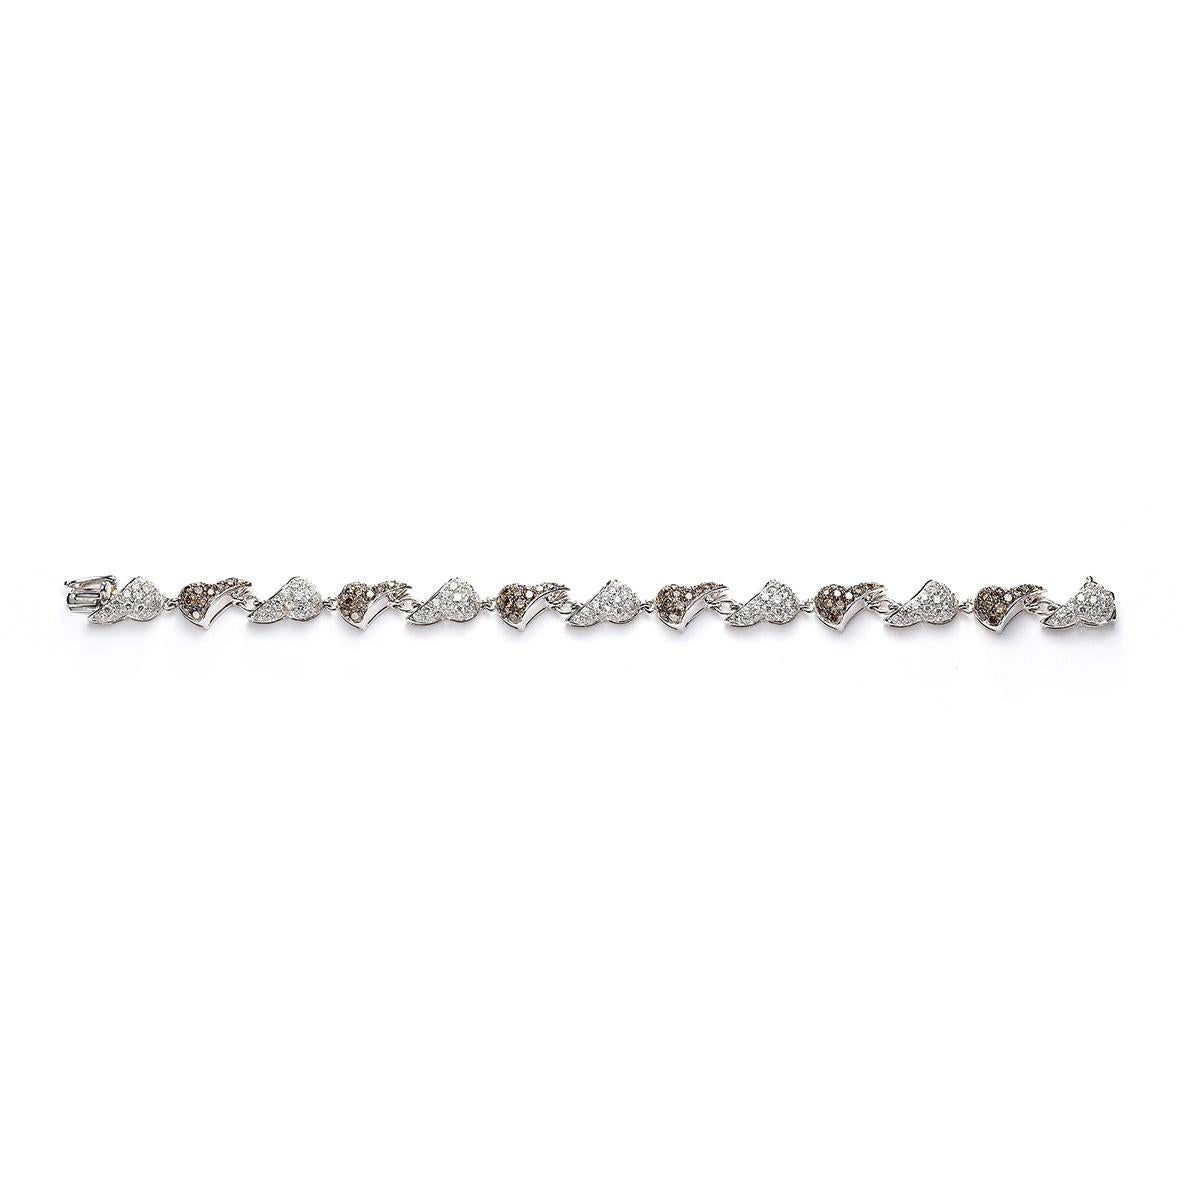 Bracelet in 18kt white gold set with 126 diamonds 3.52 cts and 108 brown diamonds 3.65 cts